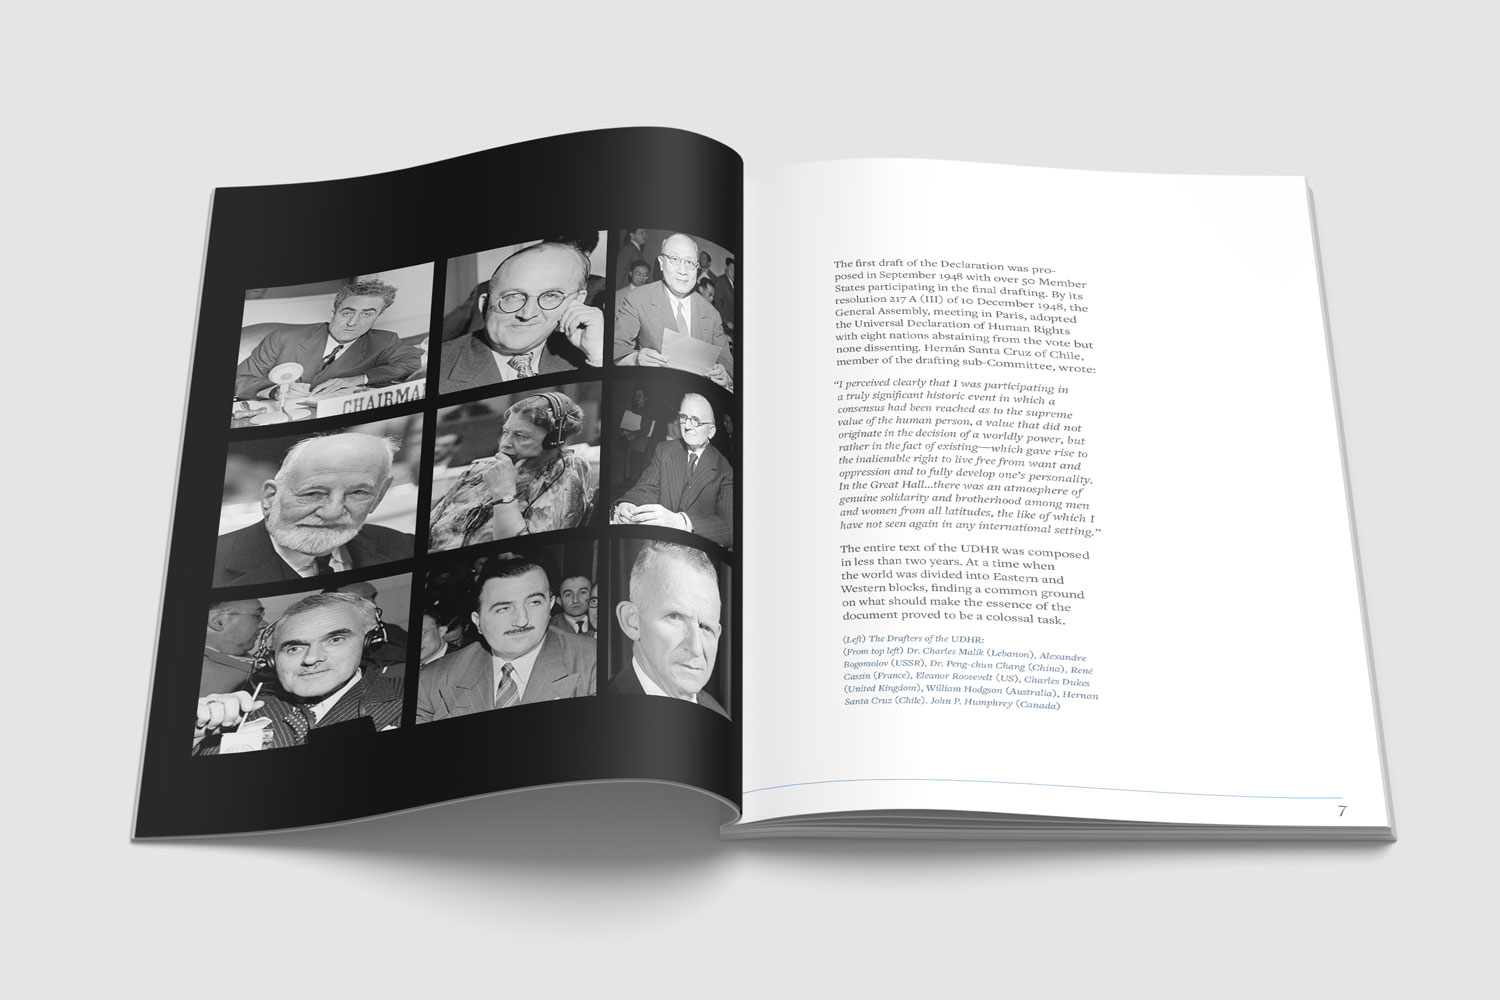 A spread of the UN booklet, showing the nine people who drafted it.